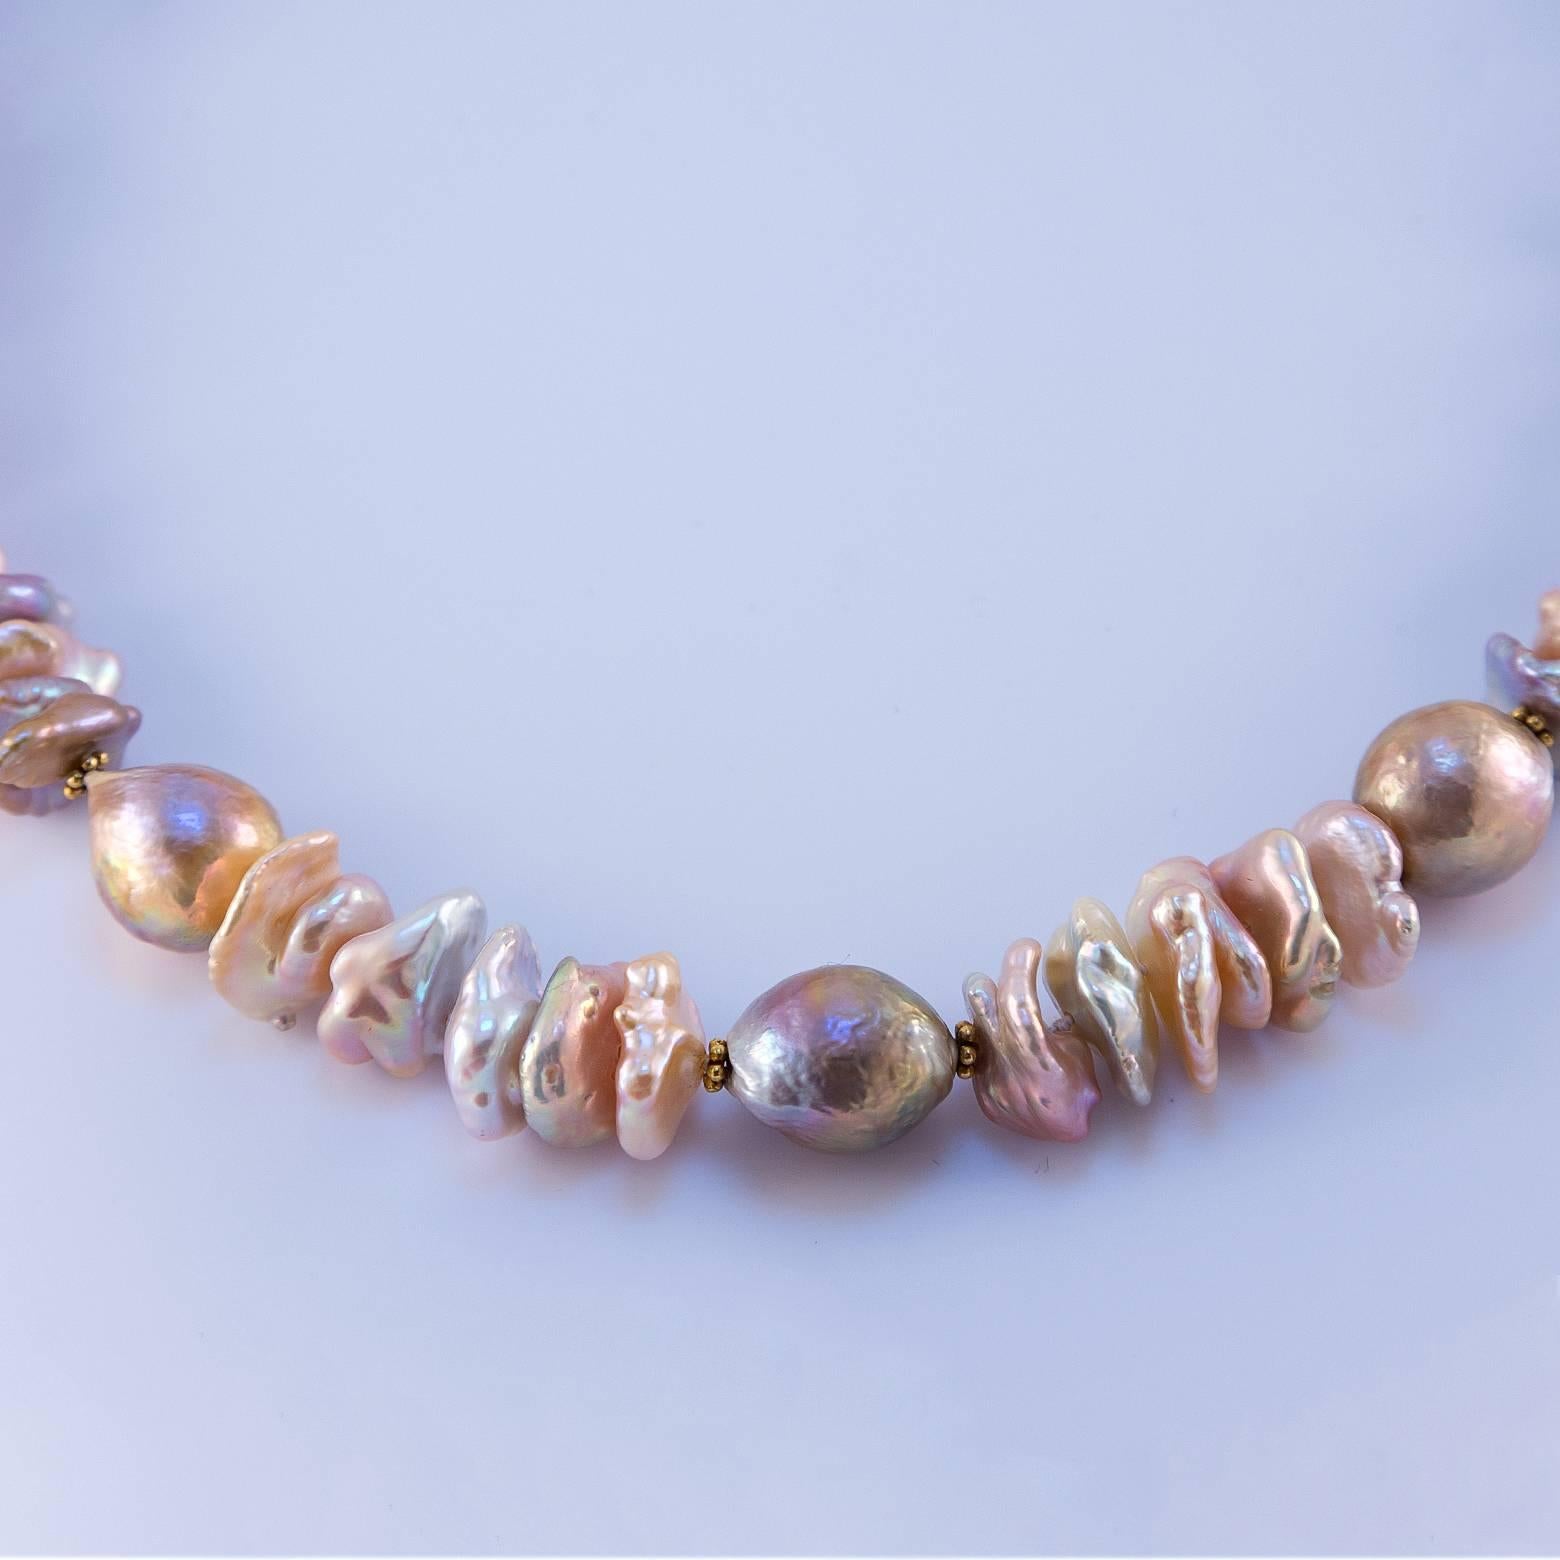 Heavy, Beautiful, Substantially Stunning Fresh Water Pearl Necklace. It has so many shades of pinks, whites, and greys that it is absolutely a gorgeous statement piece! It's elegant and royal and the complexity of the exquisite pearls makes it one